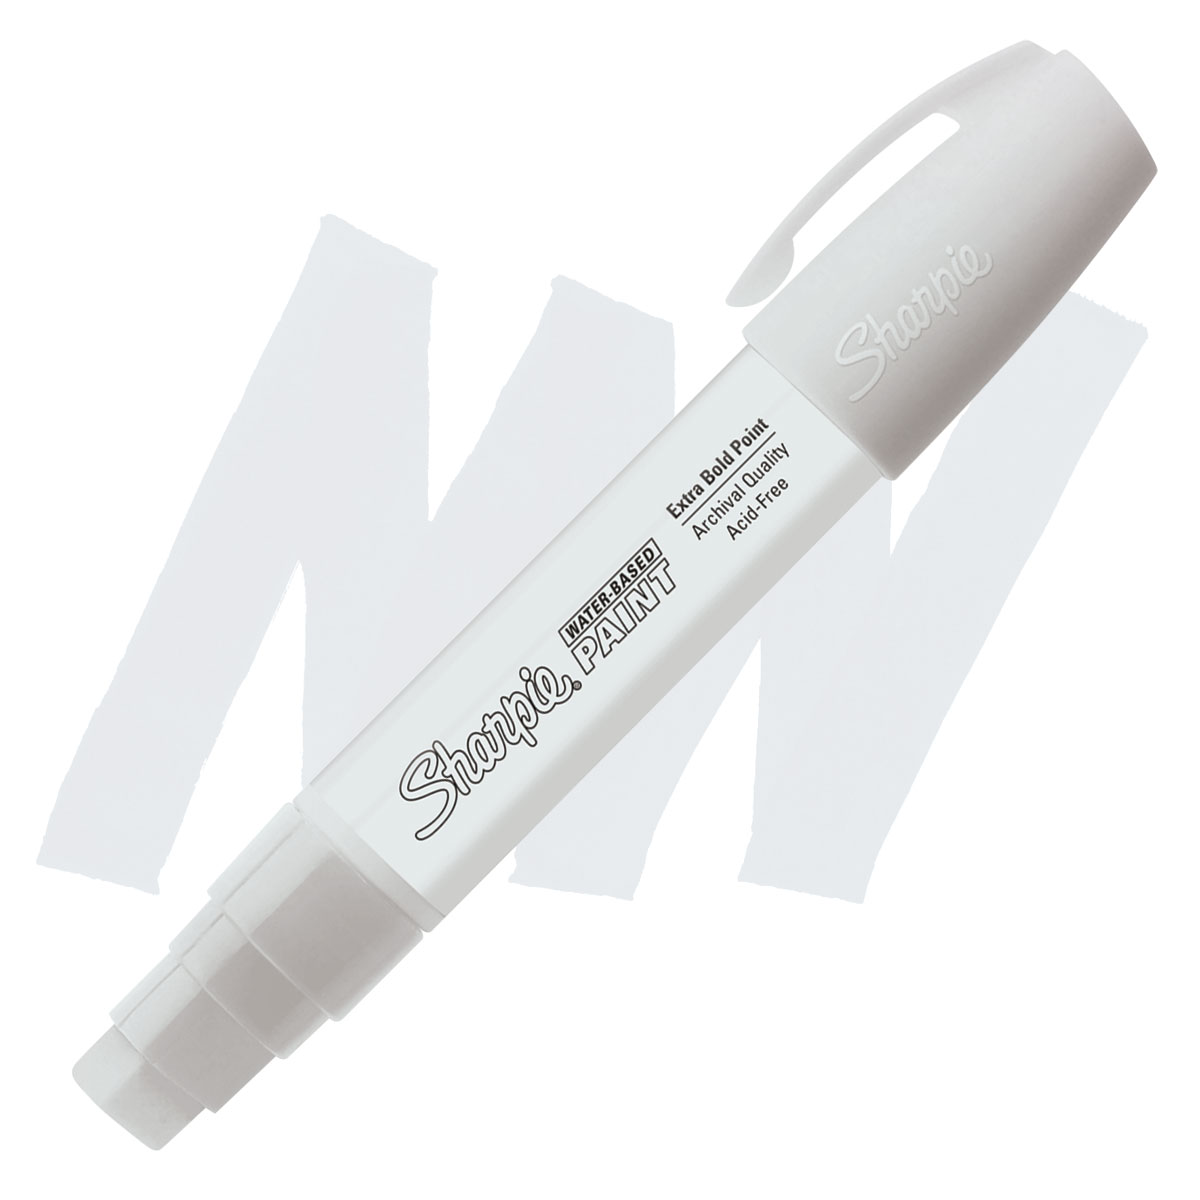 Sharpie Poster Paint Marker - White, Extra Bold